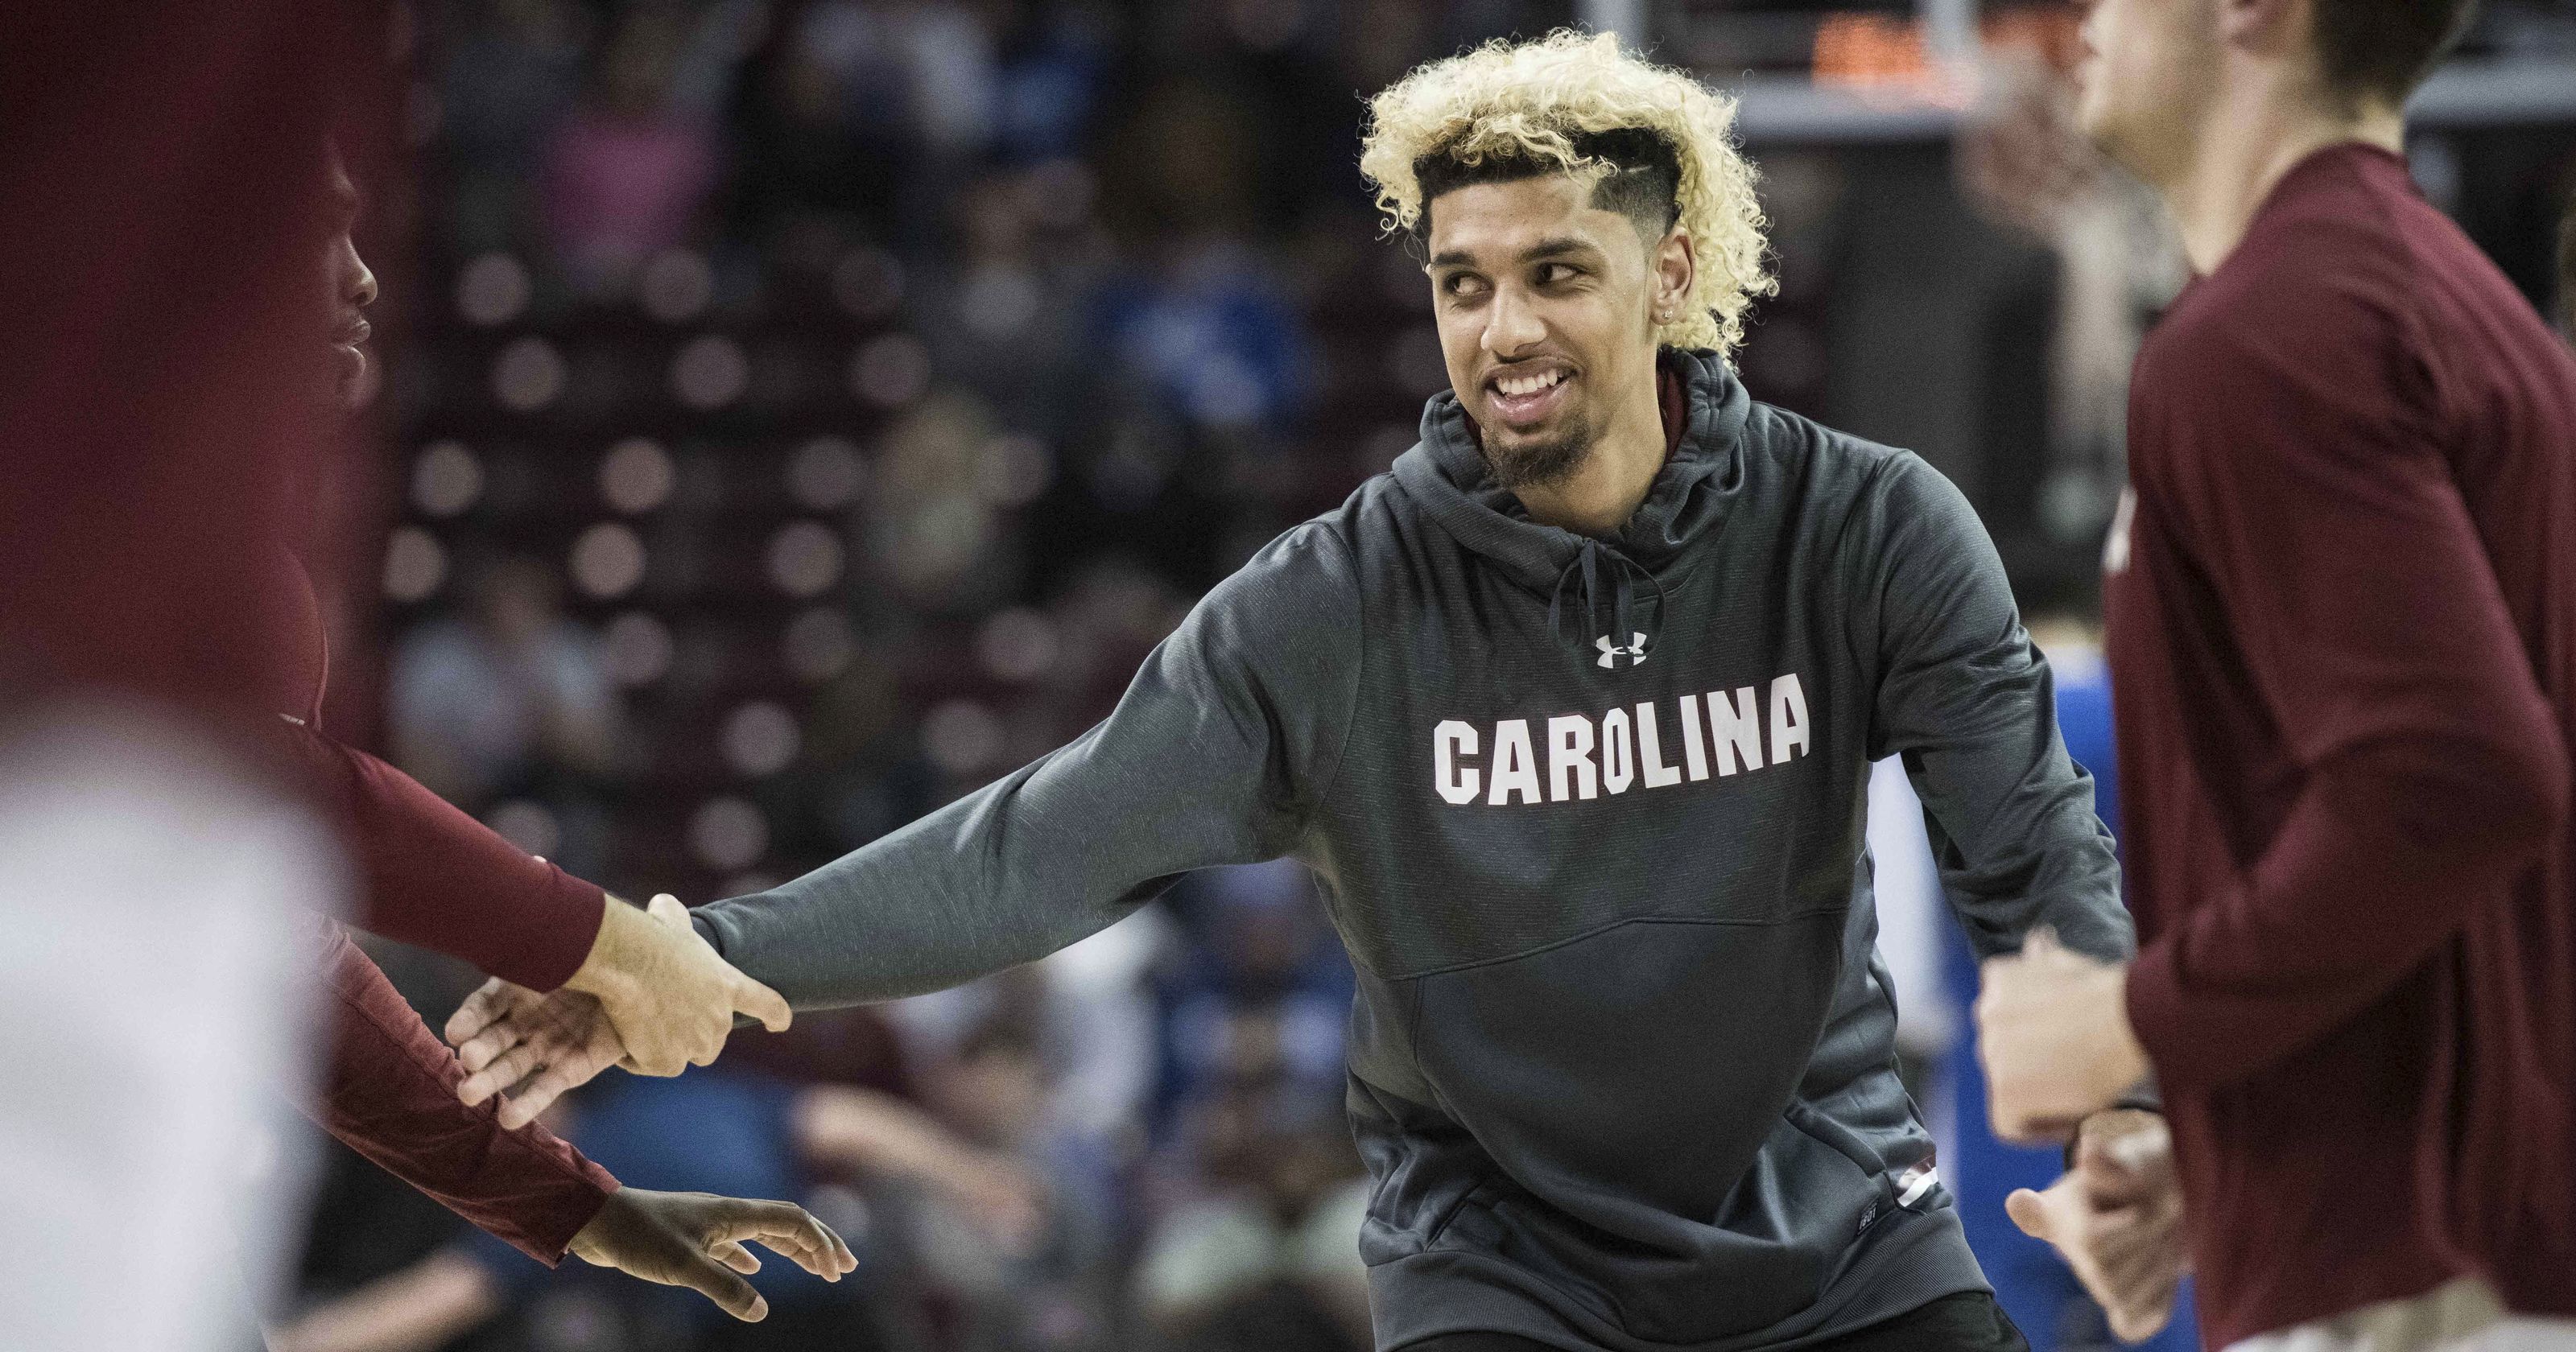 Brian Bowen will leave South Carolina and stay in 2018 NBA draft